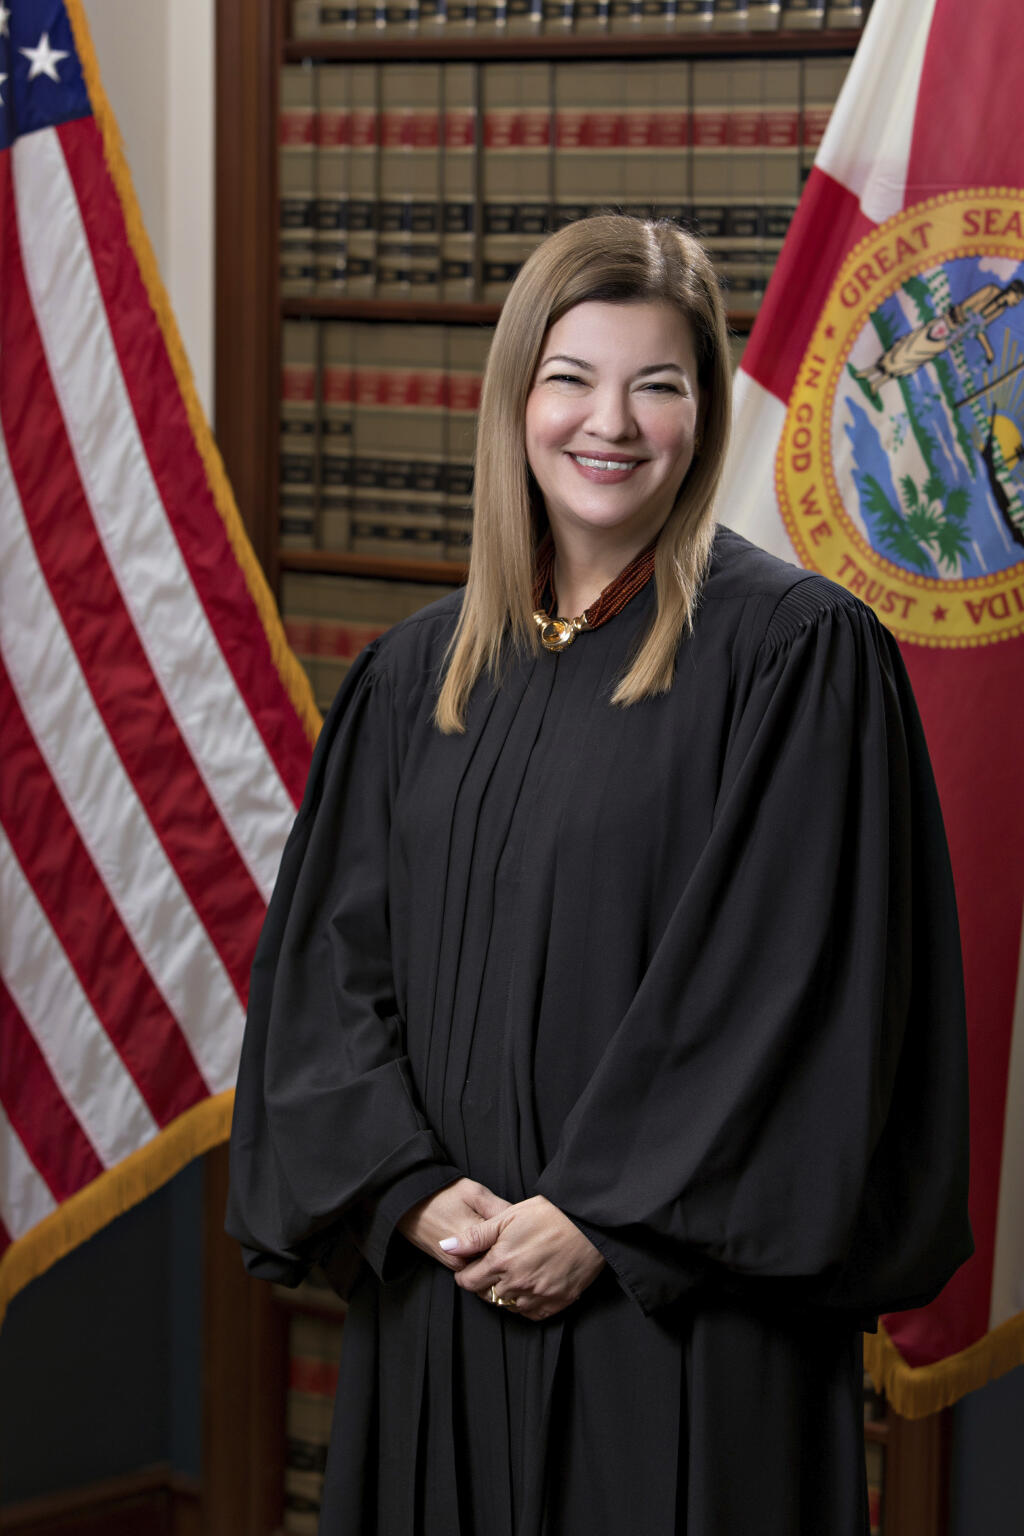 U.S. Circuit Judge Barbara Lagoa, of the United States Court of Appeals for the Eleventh Circuit, is shown in this official undated photo released by the Florida Supreme Court. (AP Photo/Florida Supreme Court)